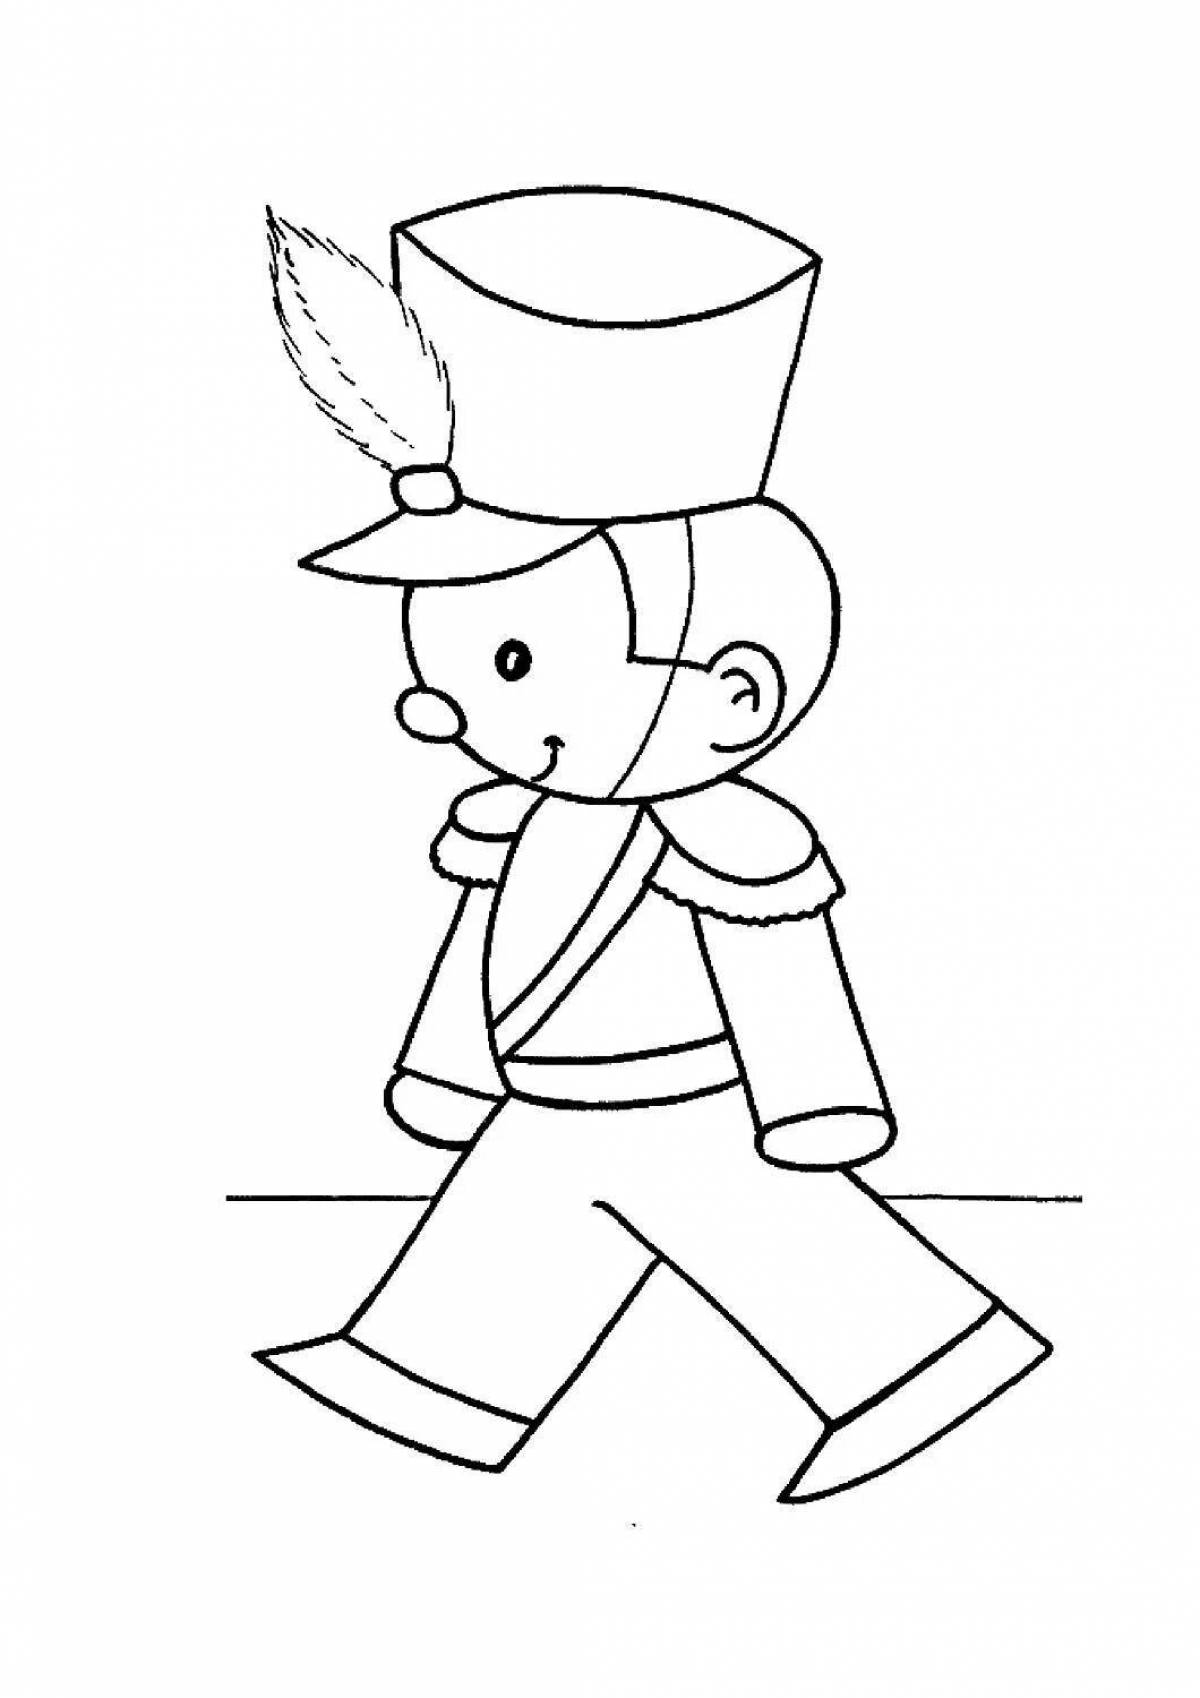 Colorful toy soldier coloring book